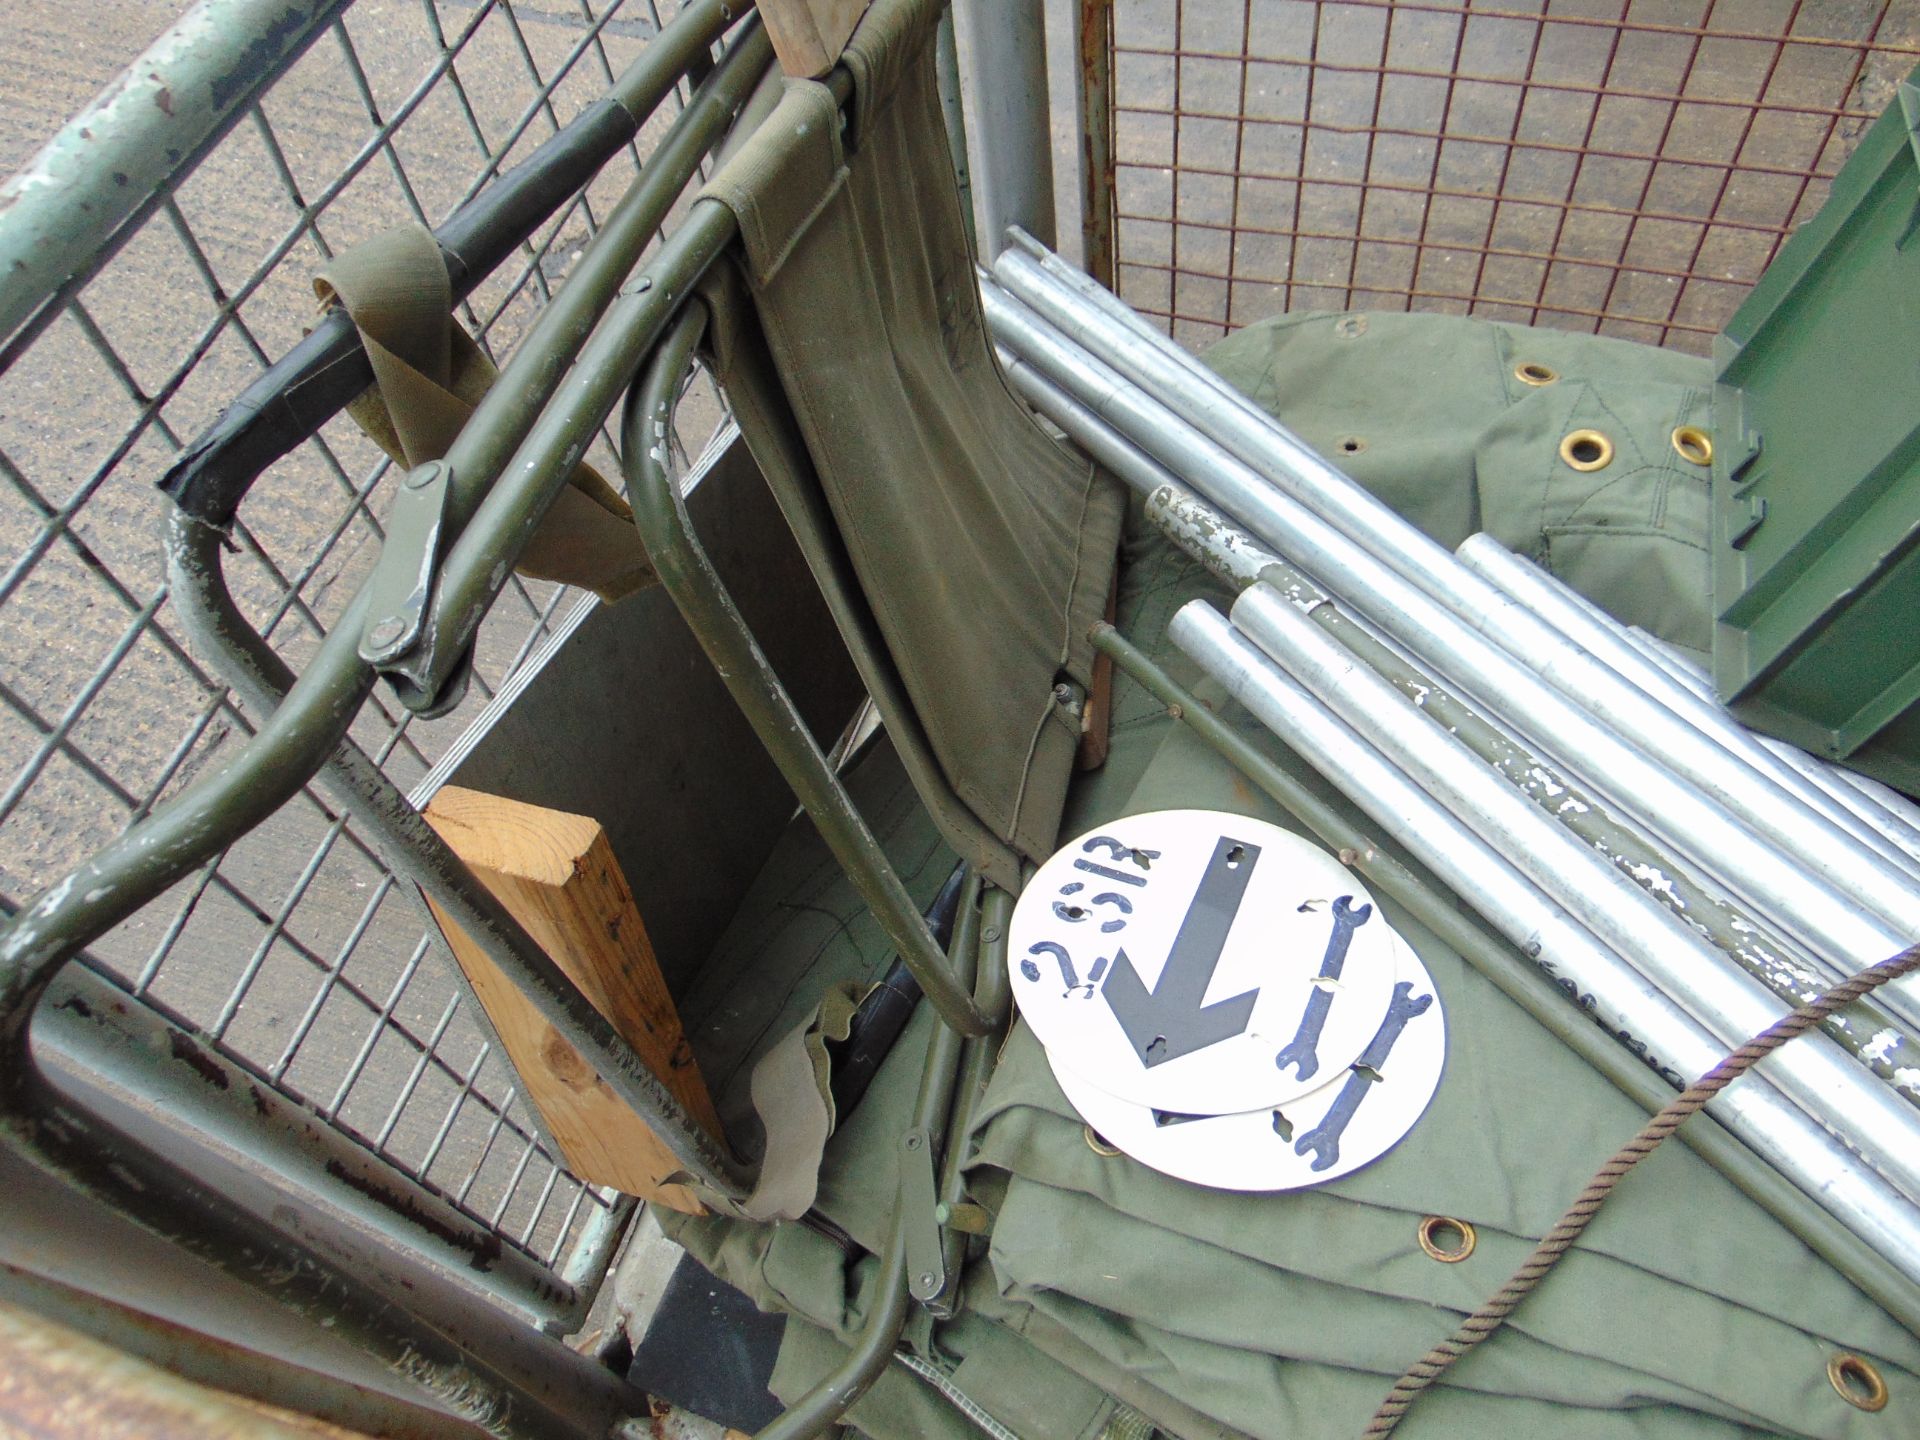 1 x Stillage Containing Shelter/Tent with poles fittings Etc - Image 4 of 6